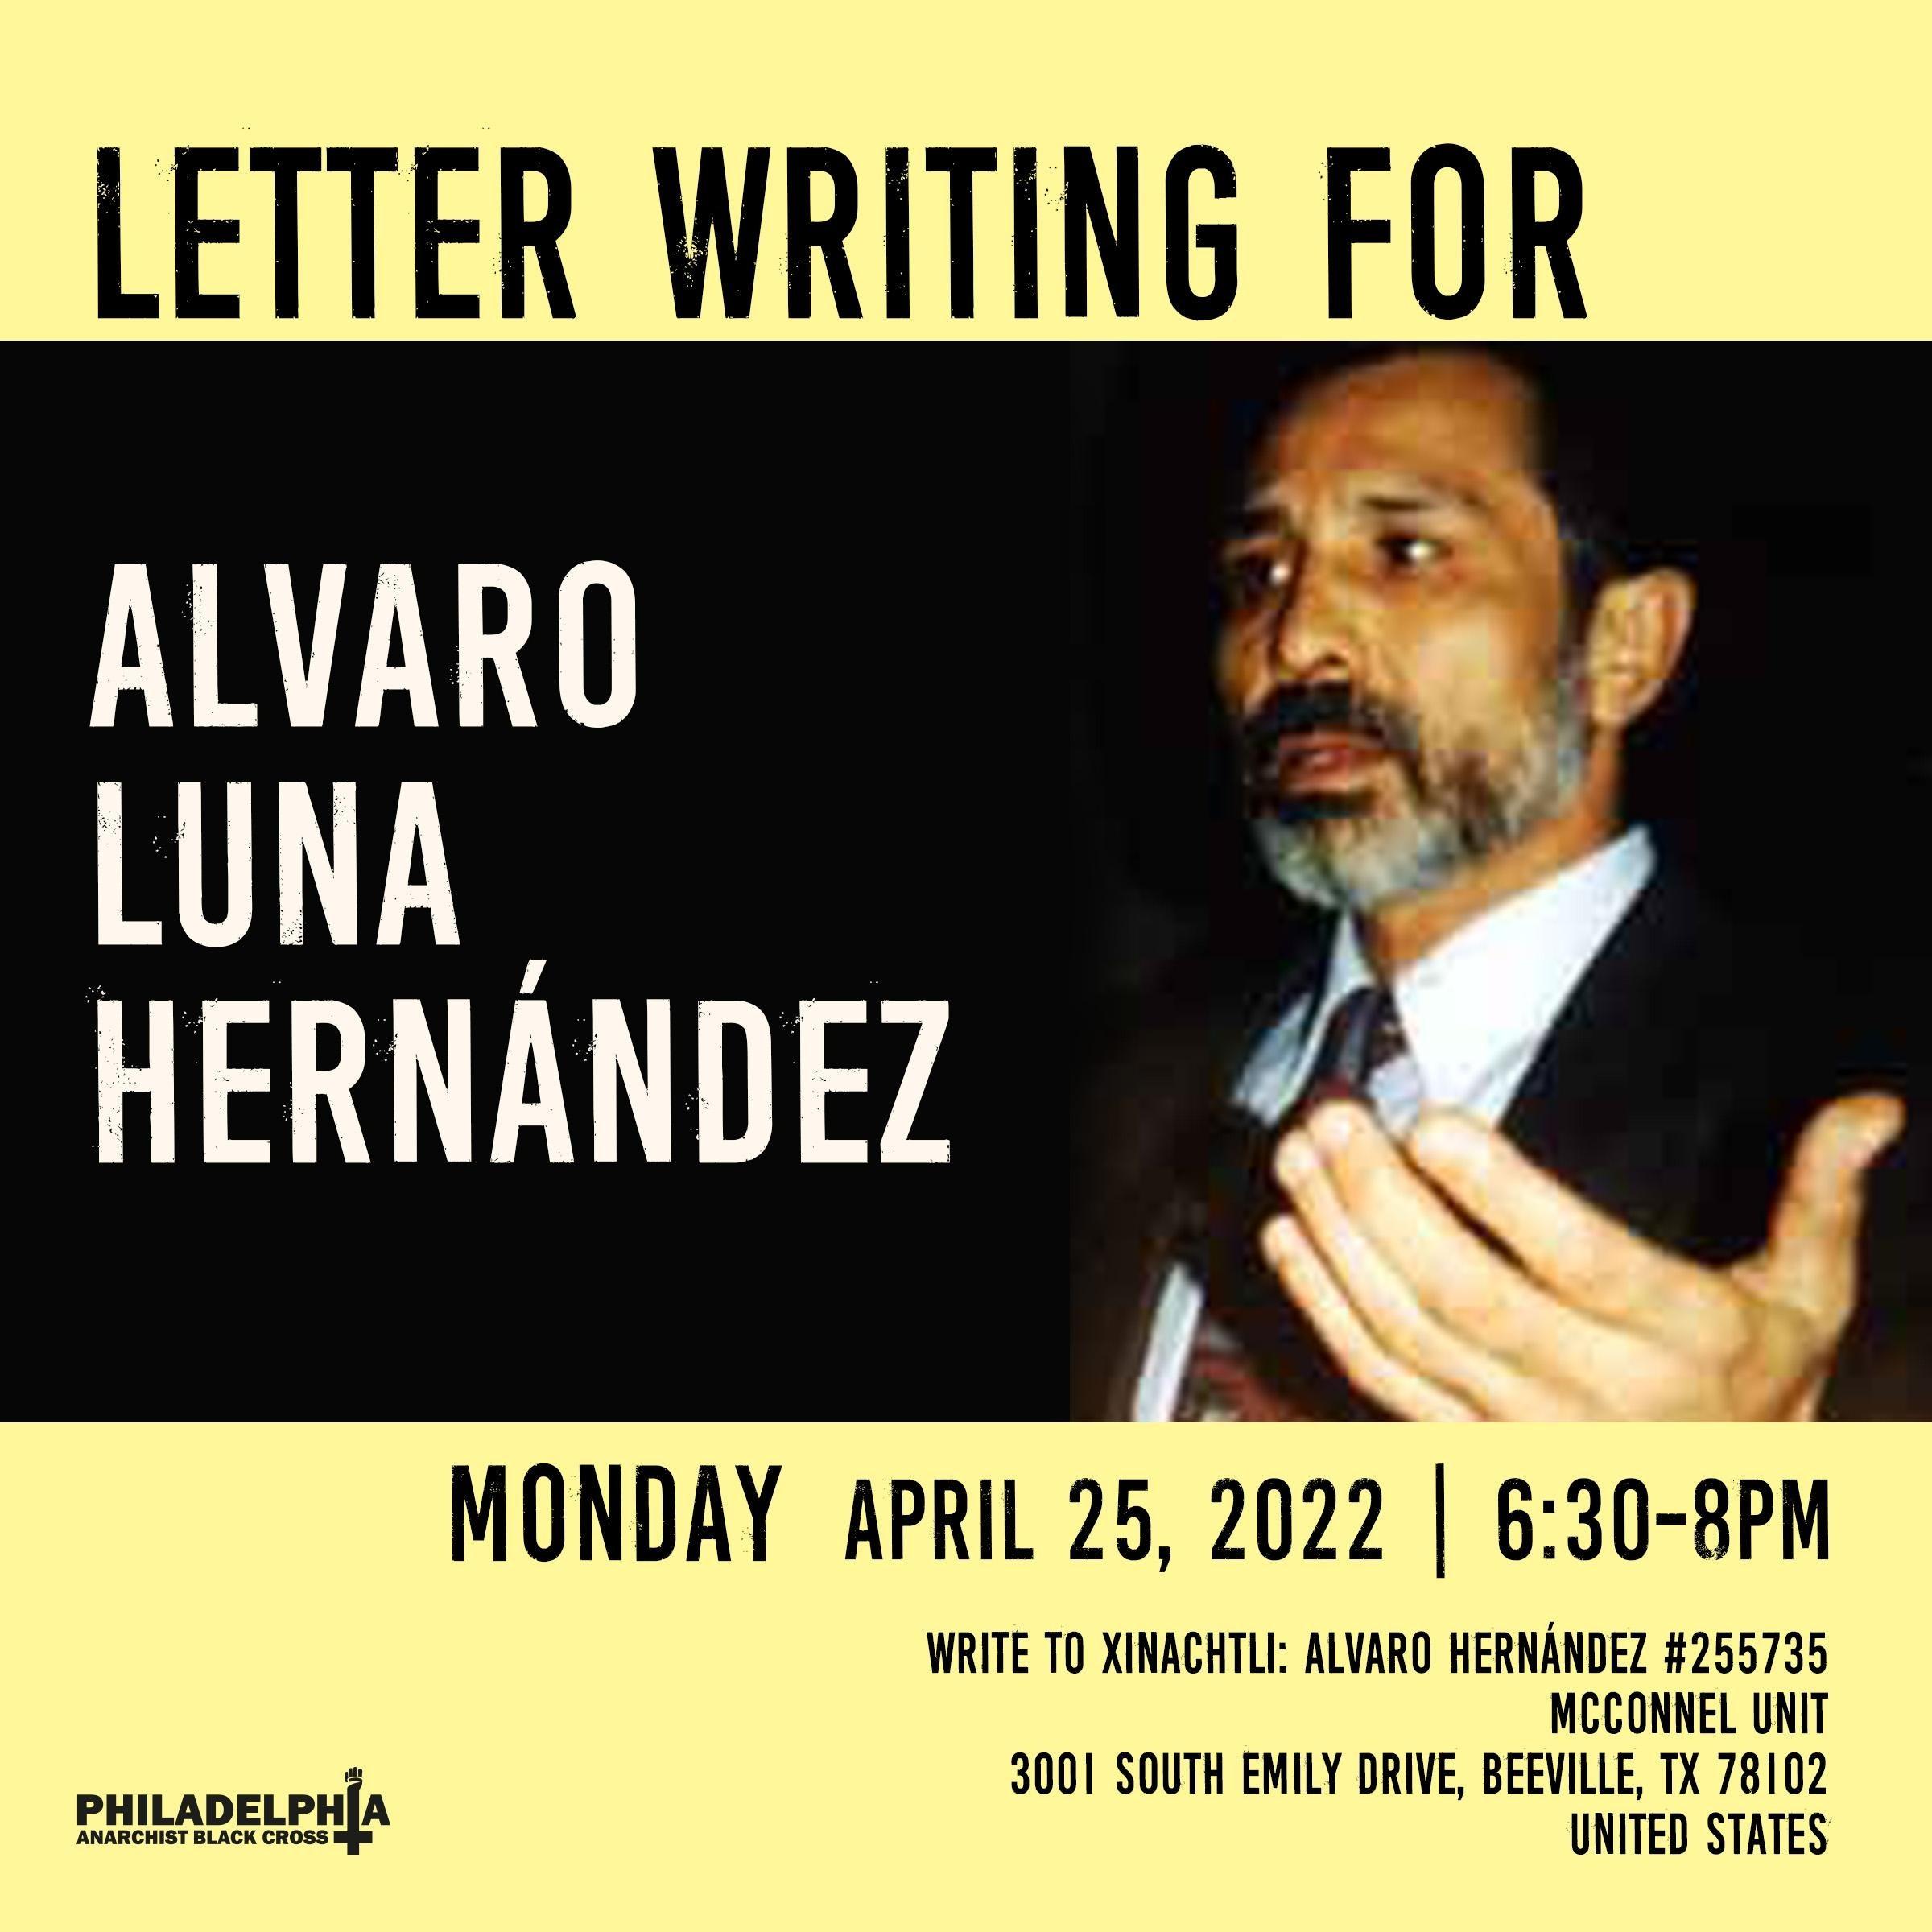 Monday April 25th: Letter-writing for Xinachtli